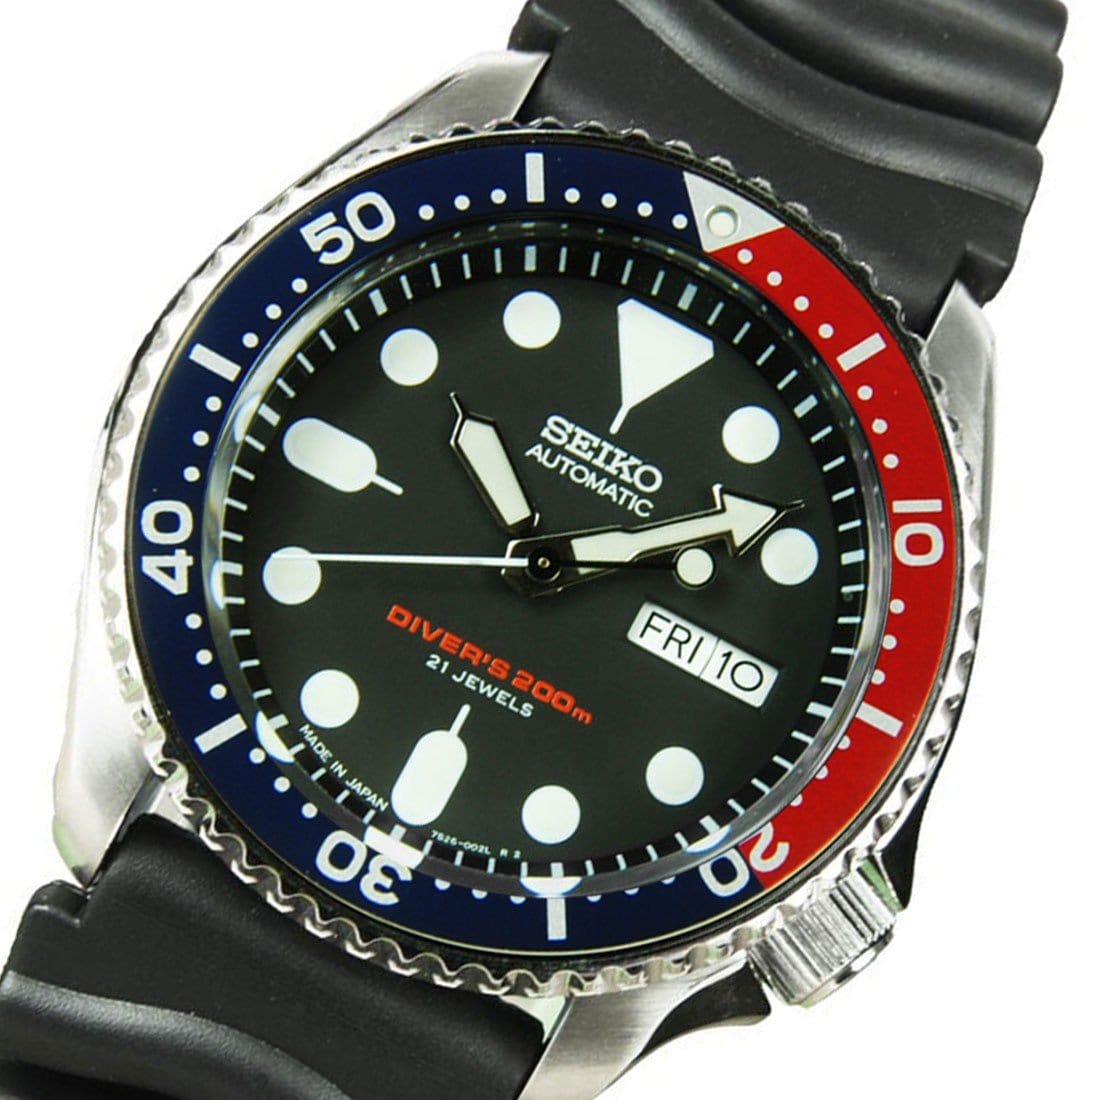 SKX009J SKX009J1 Seiko Automatic Japan Made Male Divers Watch with Extra Strap